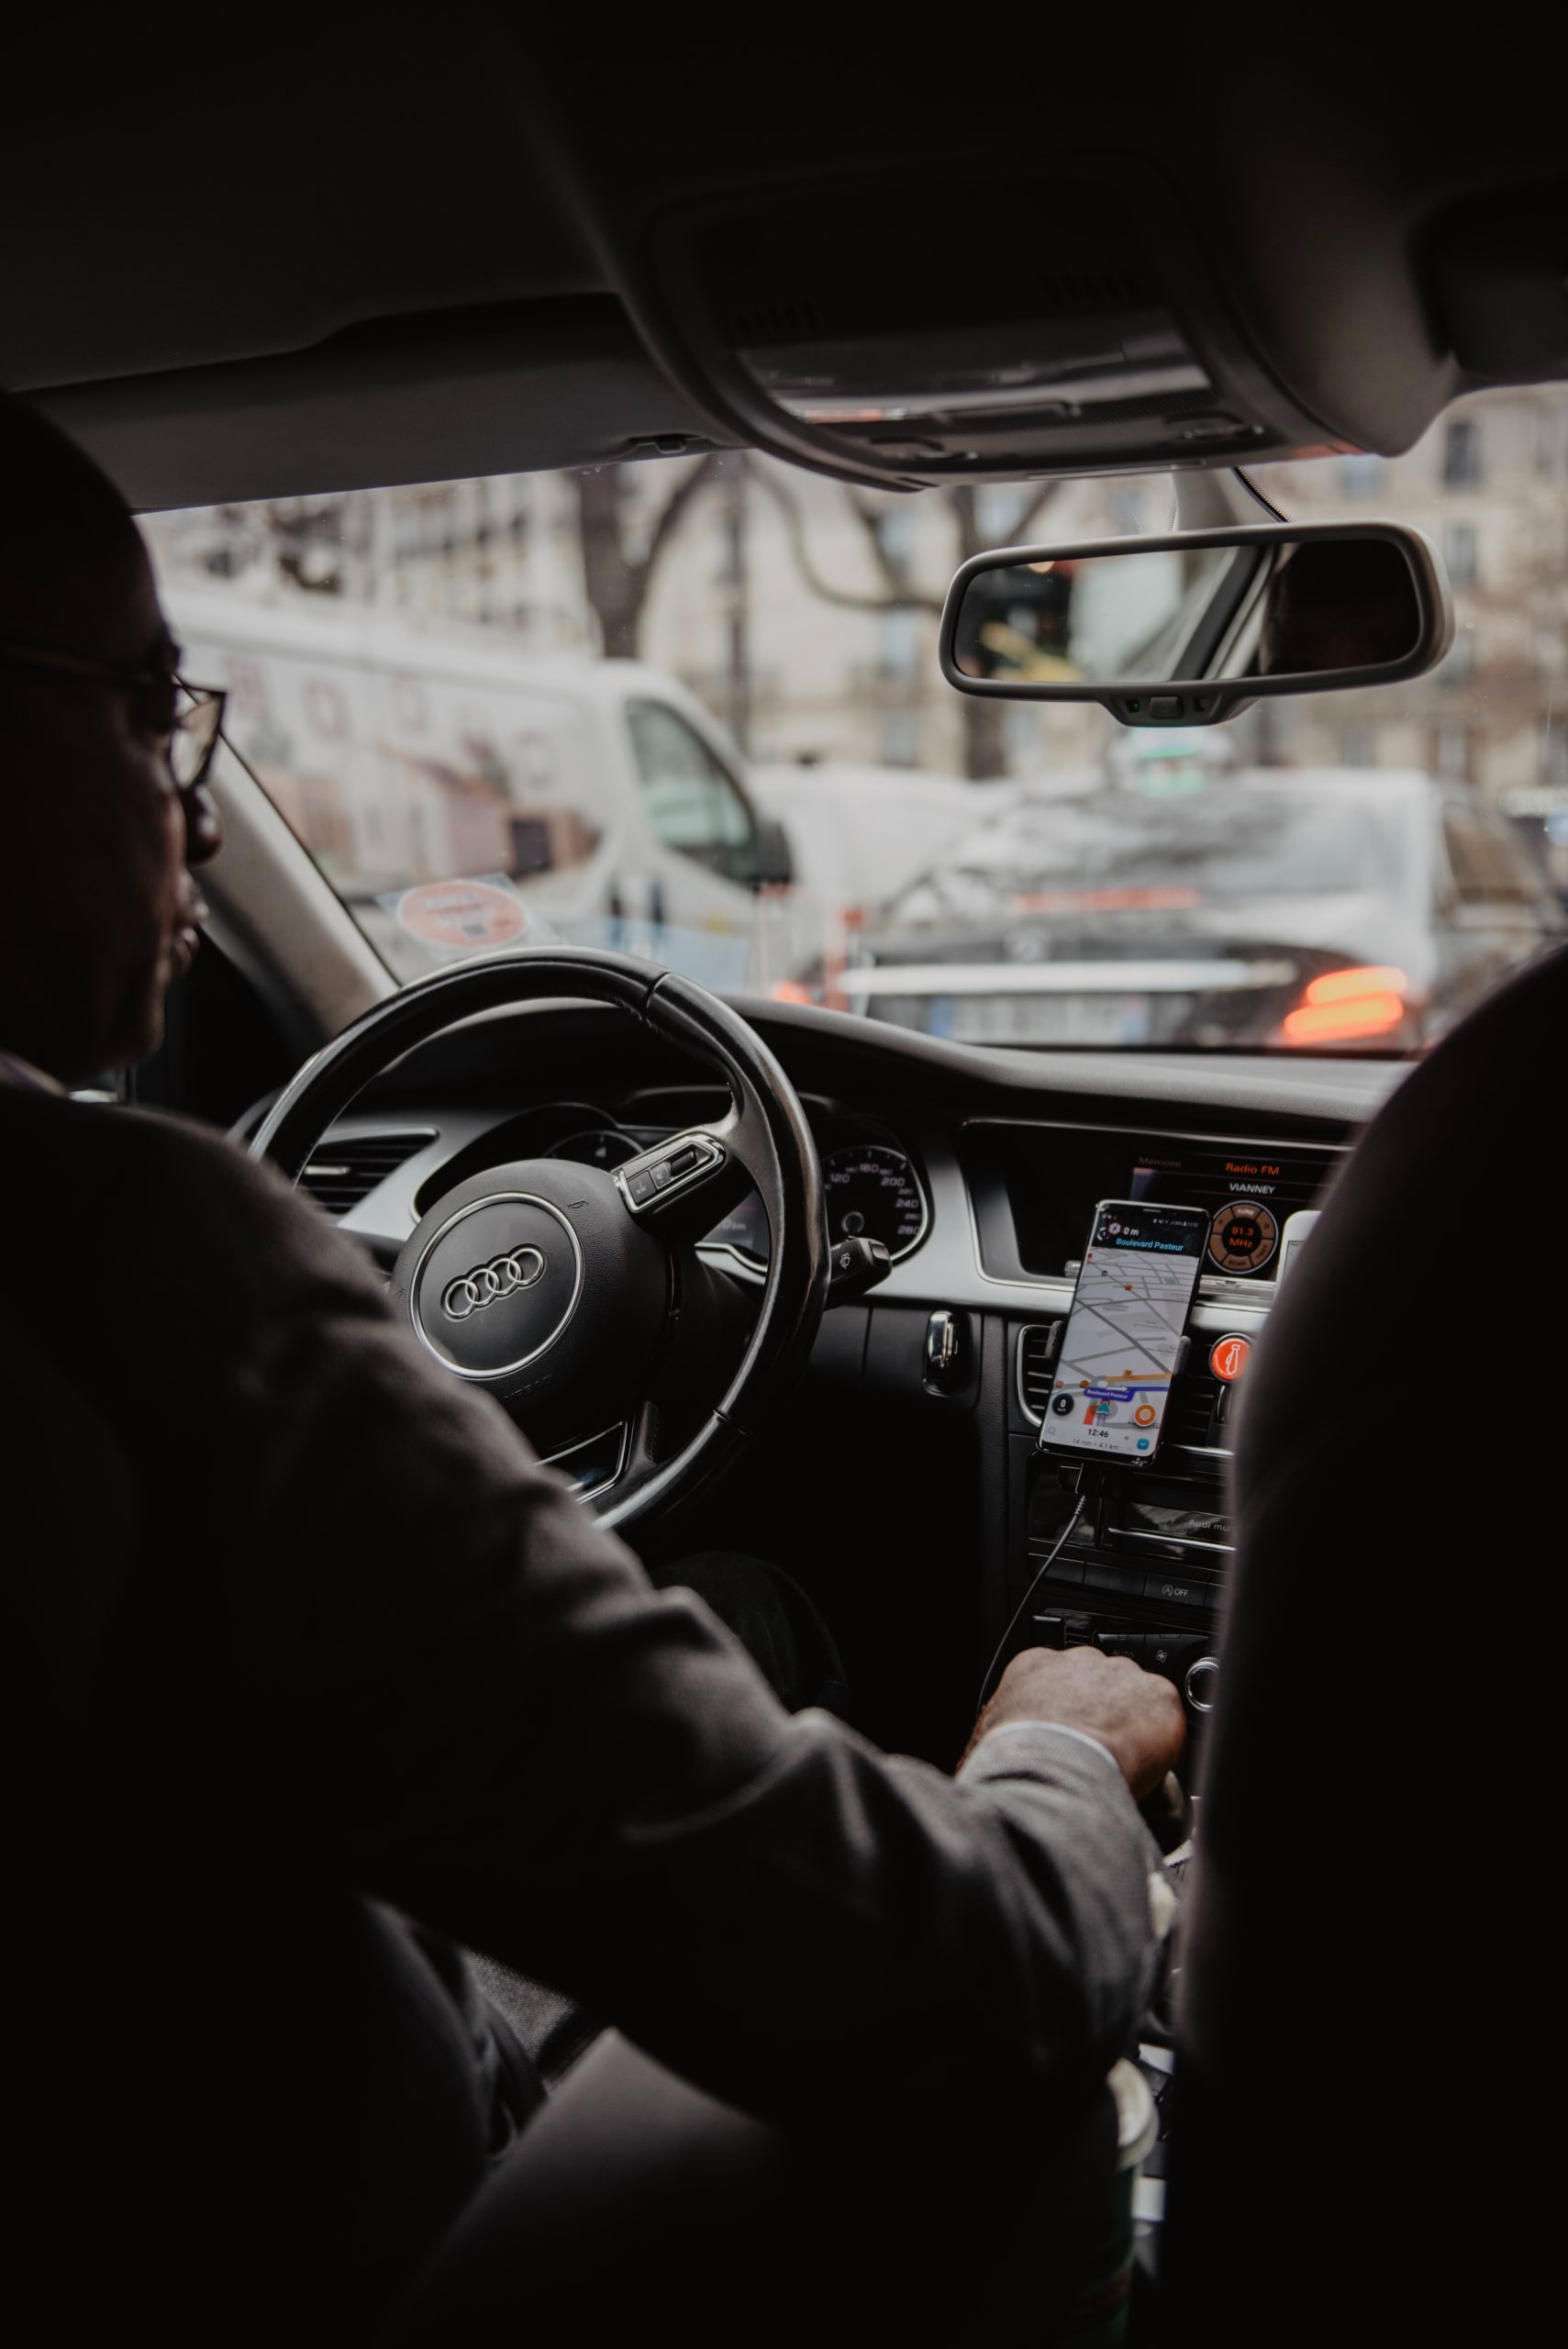 What Happens If I Drive Uber and Get Charged with Assault?